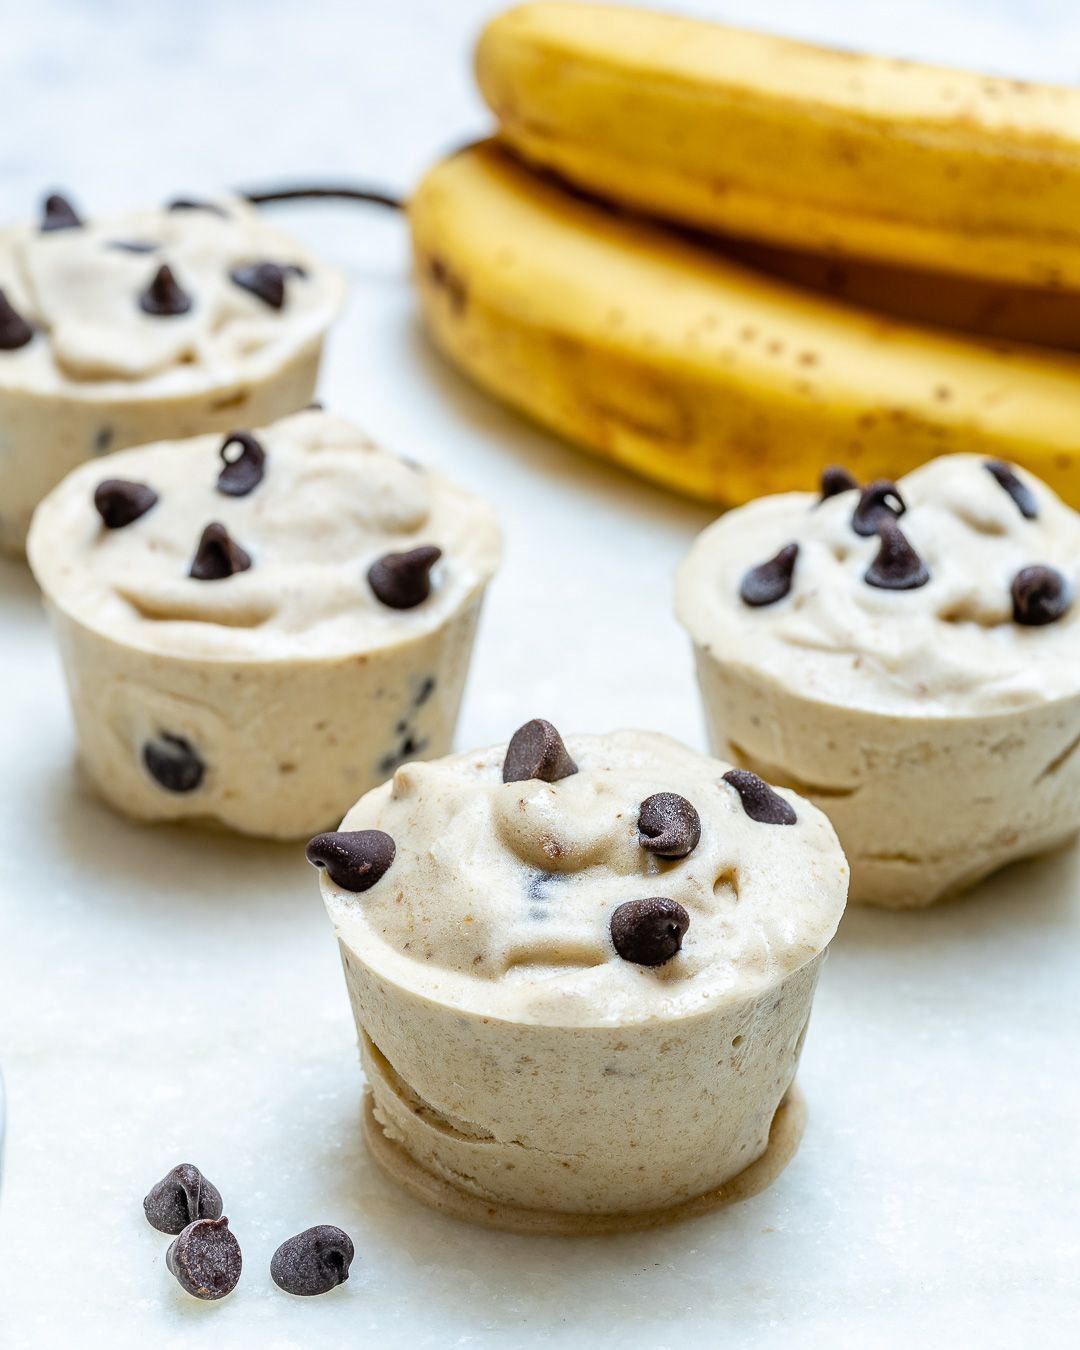 11 healthy recipes Clean chocolate chips ideas